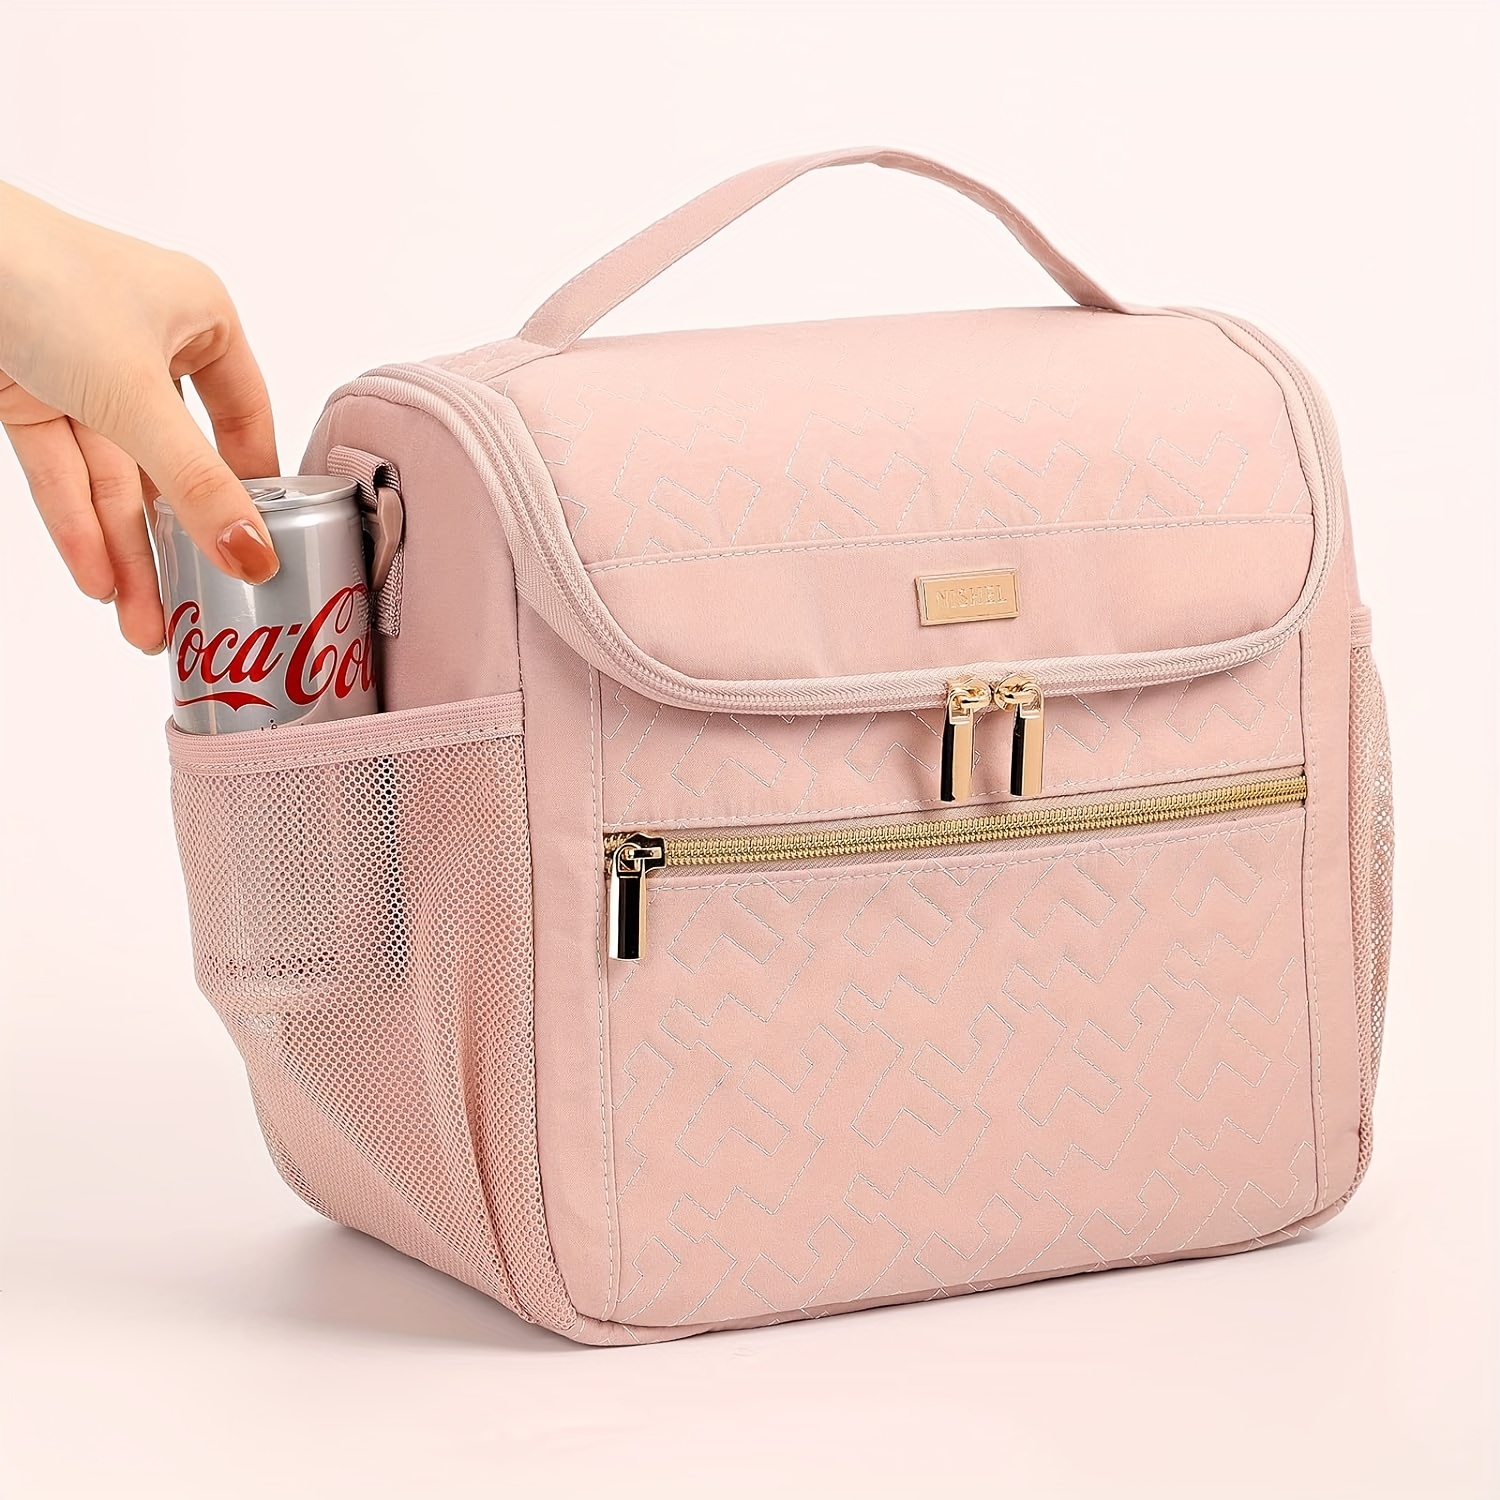 

Chic Pink Insulated Lunch Bag For Women - Portable, Leakproof Cooler With Shoulder Strap, Reusable Polyester Bento Box Carrier For Work